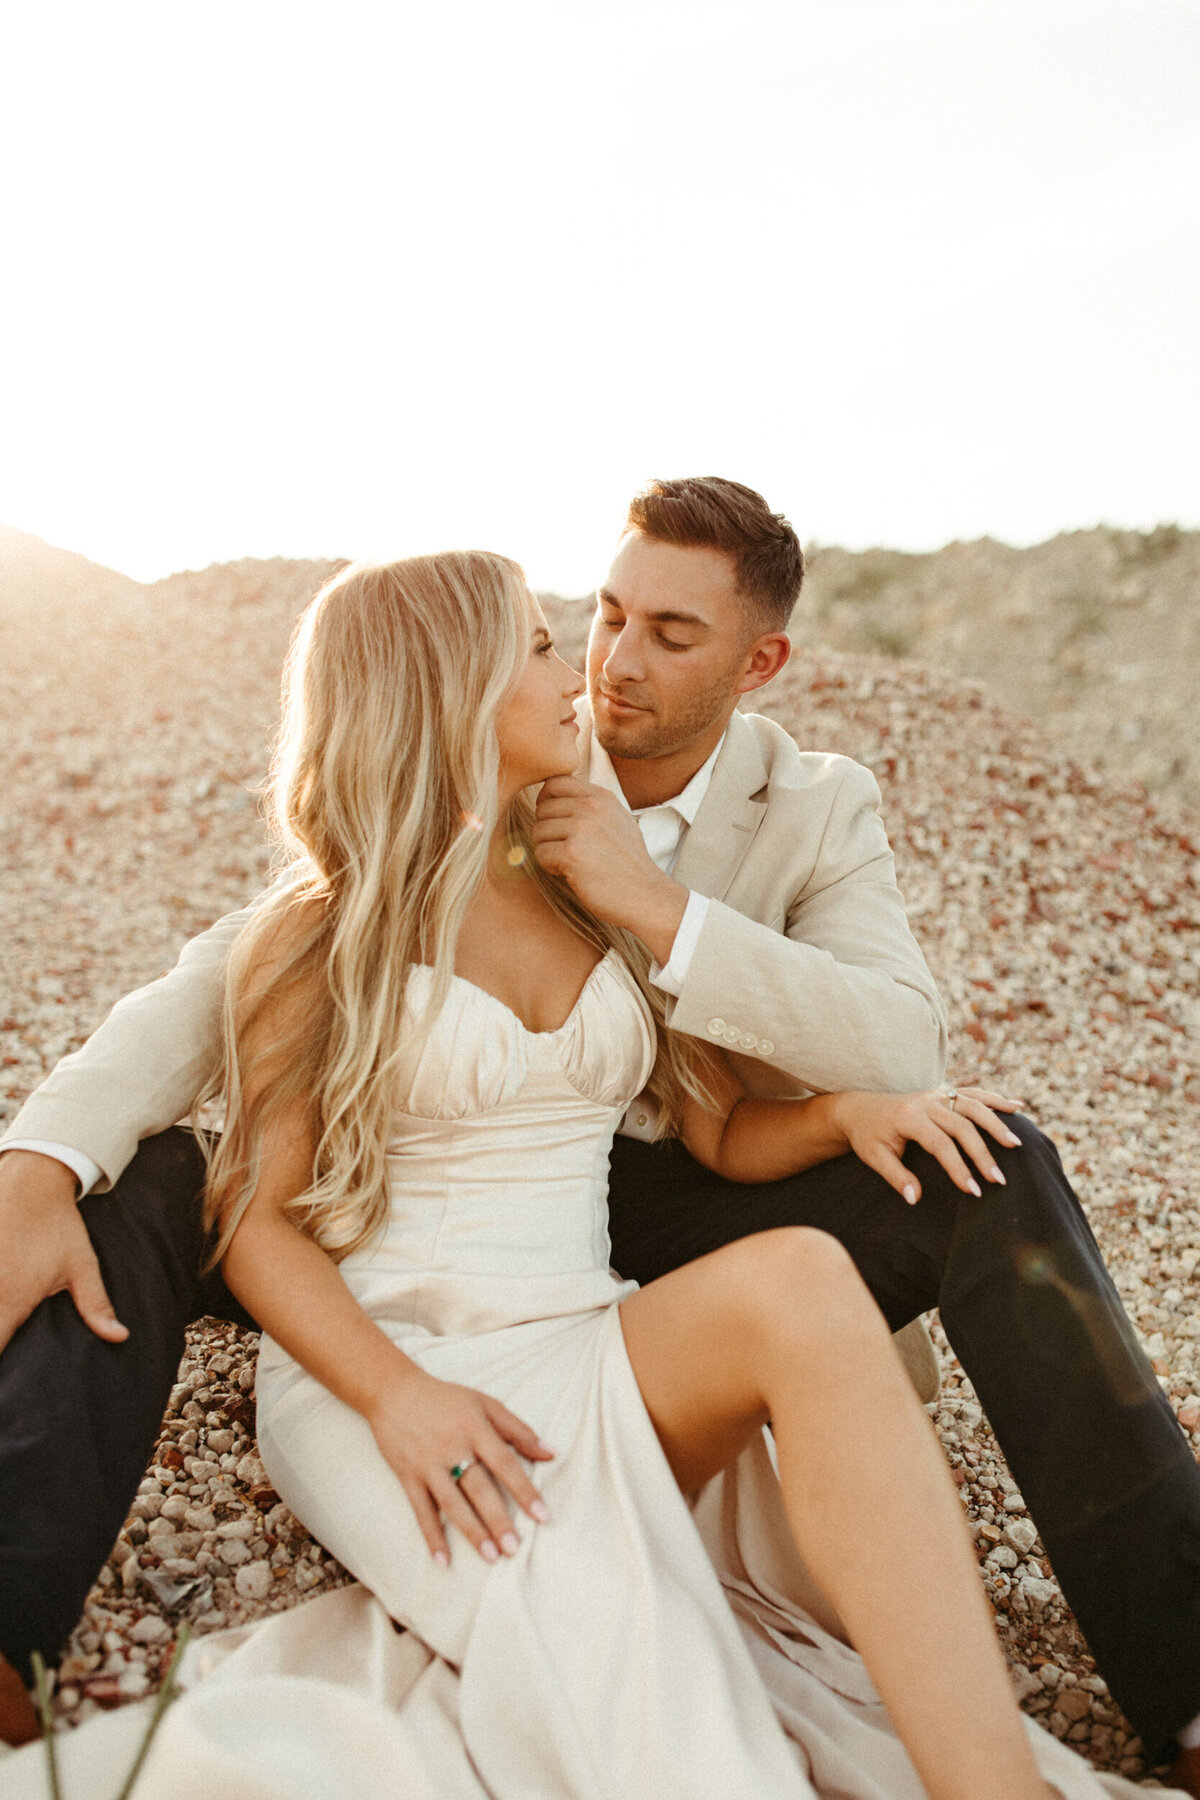 A girl in a silk champagne colored dress is sitting down between her fiancé's legs while he pulls her in for a kiss.